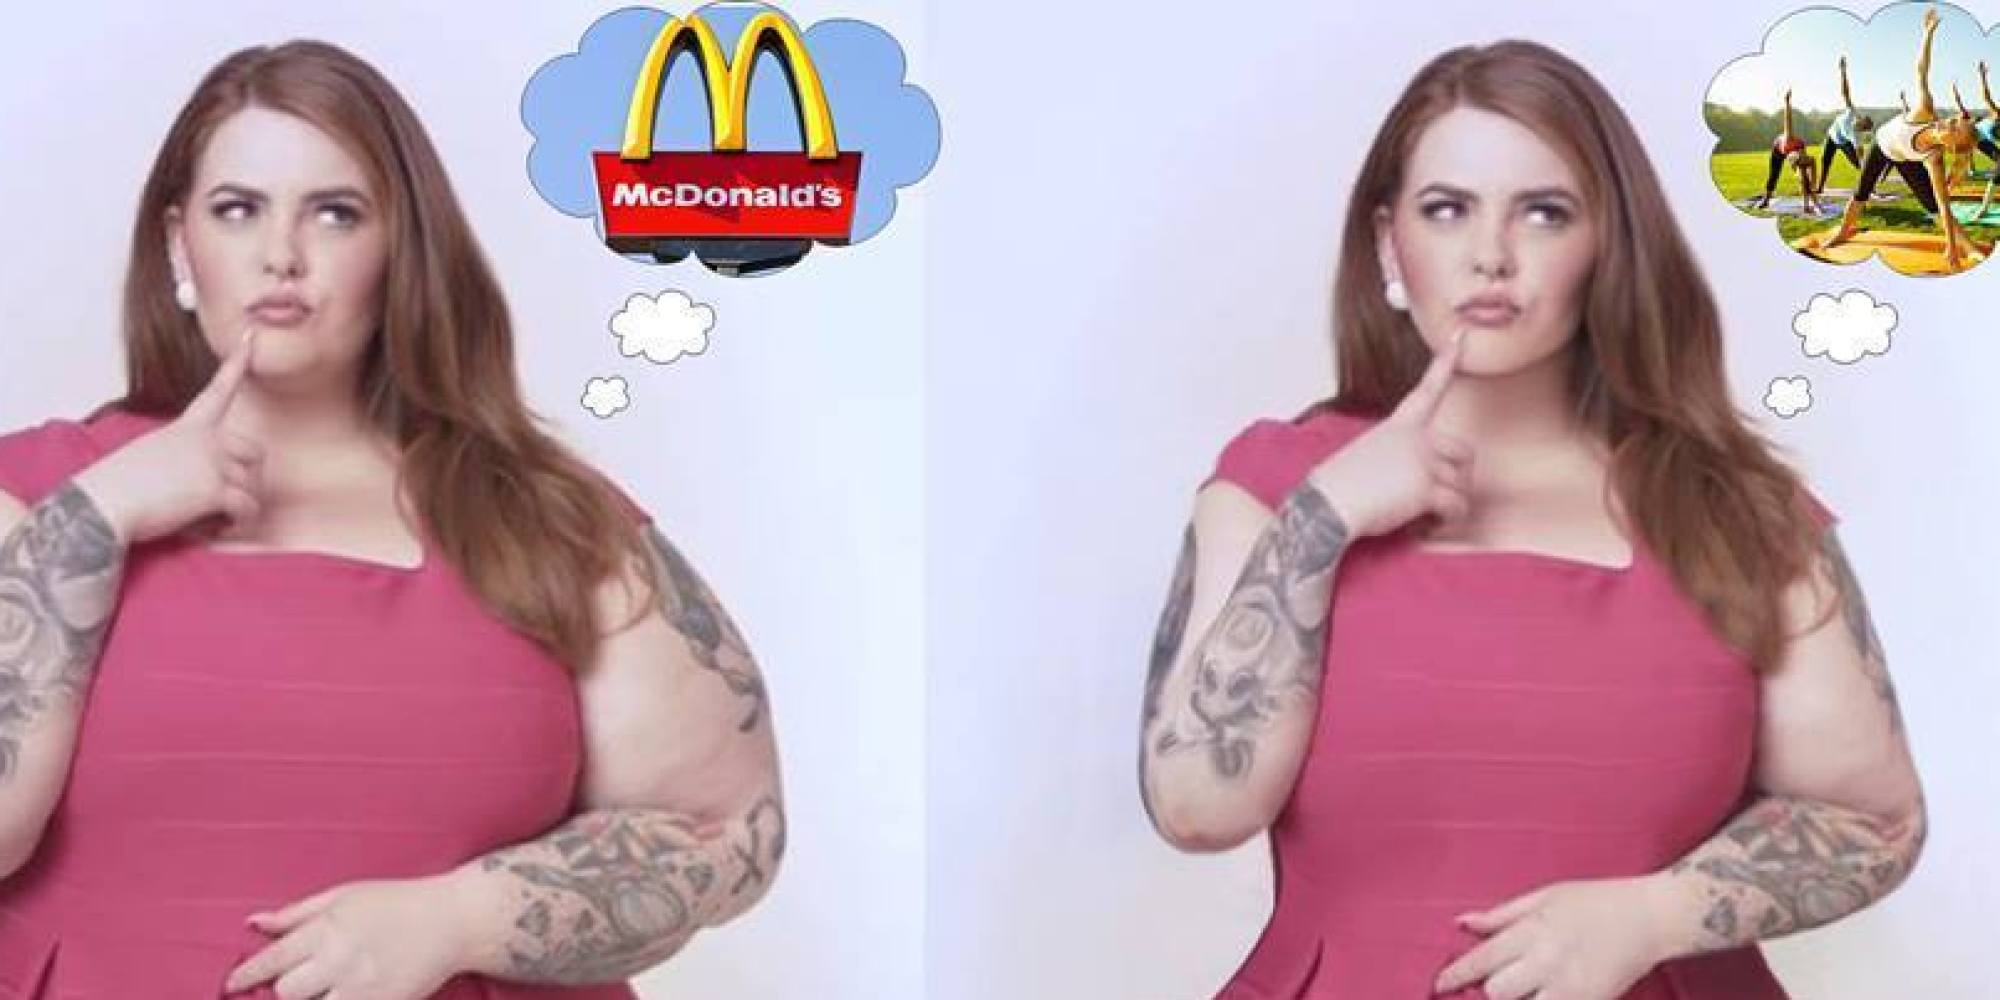 Tess Holliday Slams Project Harpoon Facebook Page That Photoshops Plus